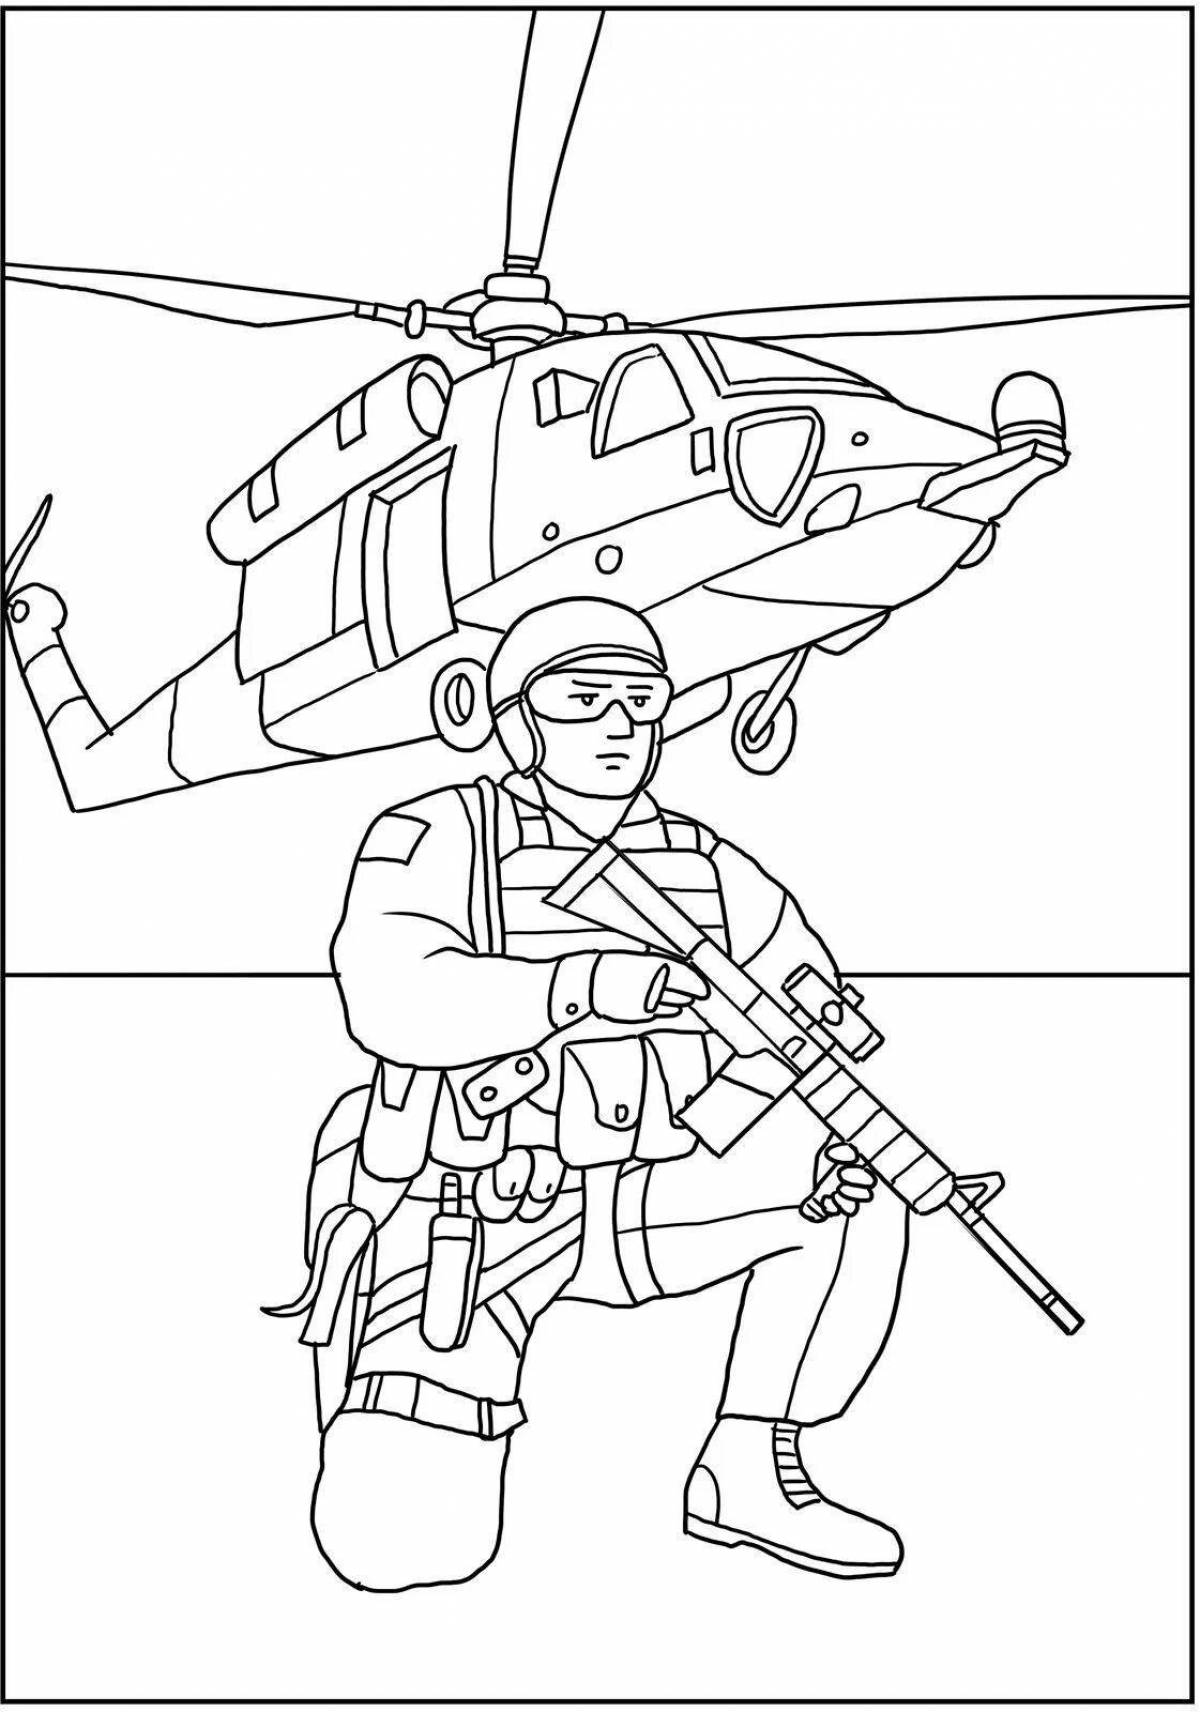 Royal soldier coloring pages for boys